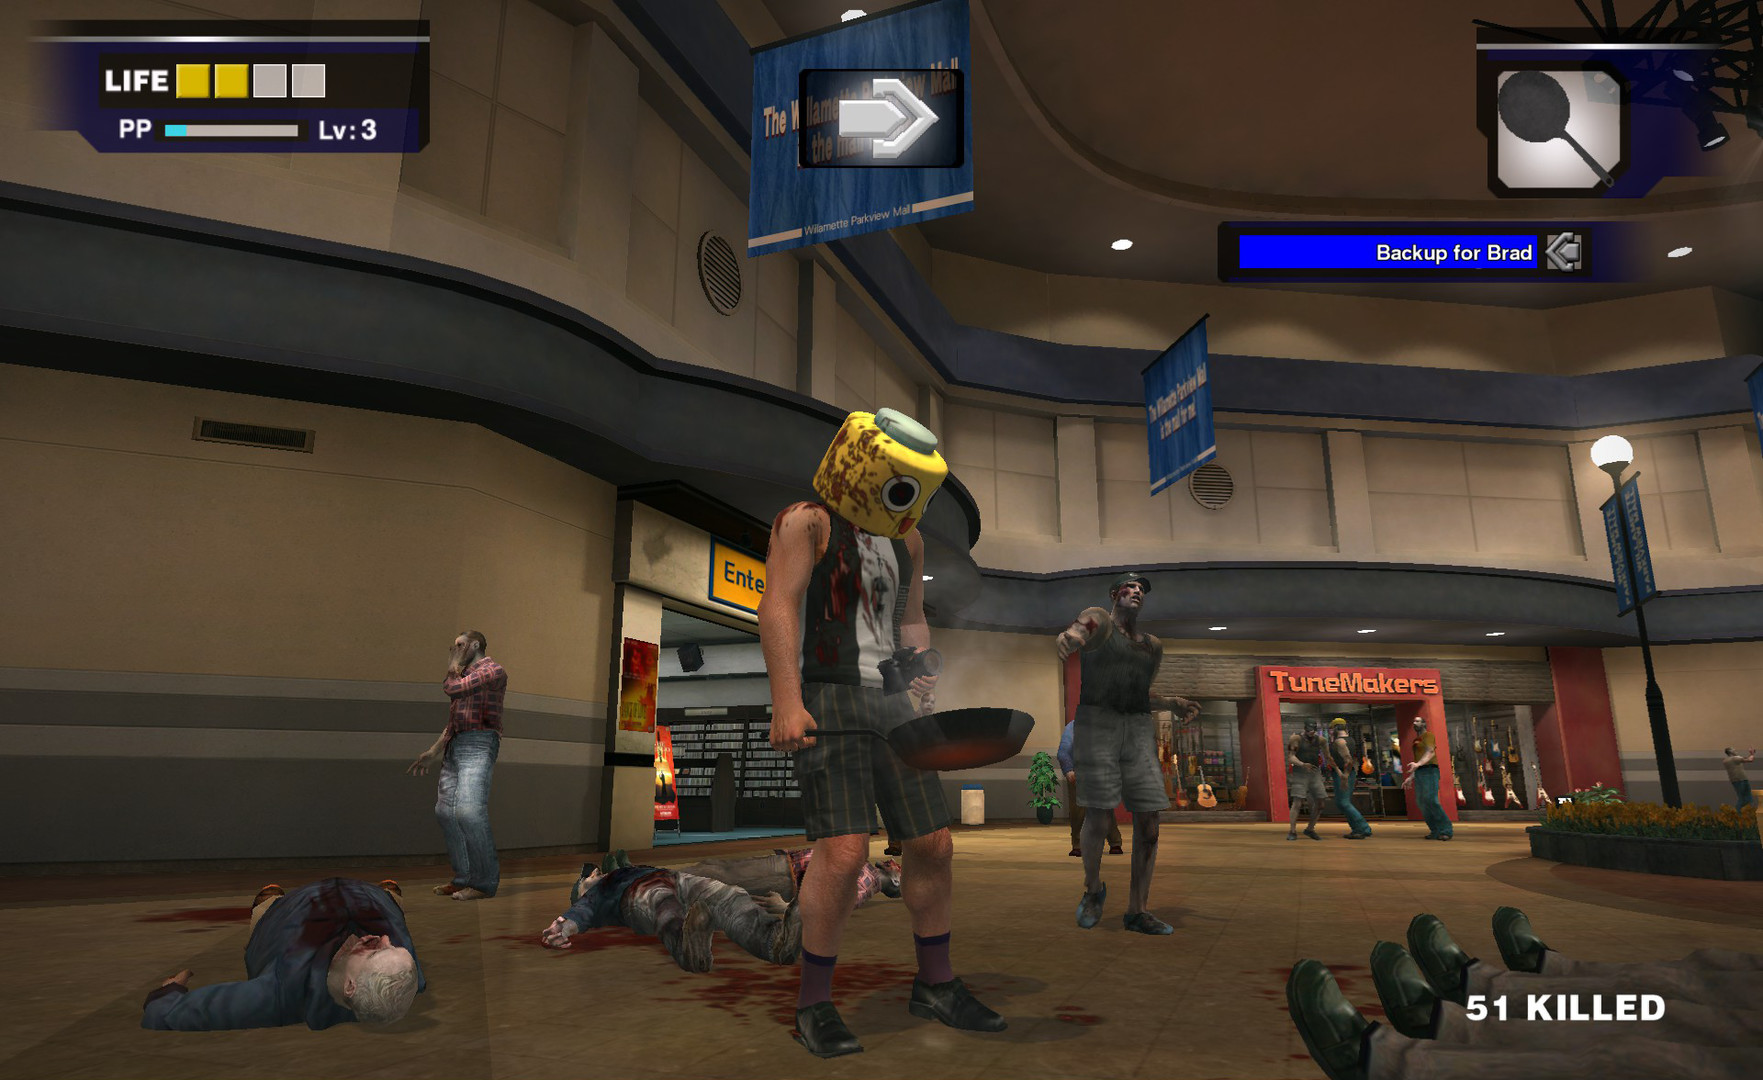 Buy Dead Rising 2 Off The Record Steam Key